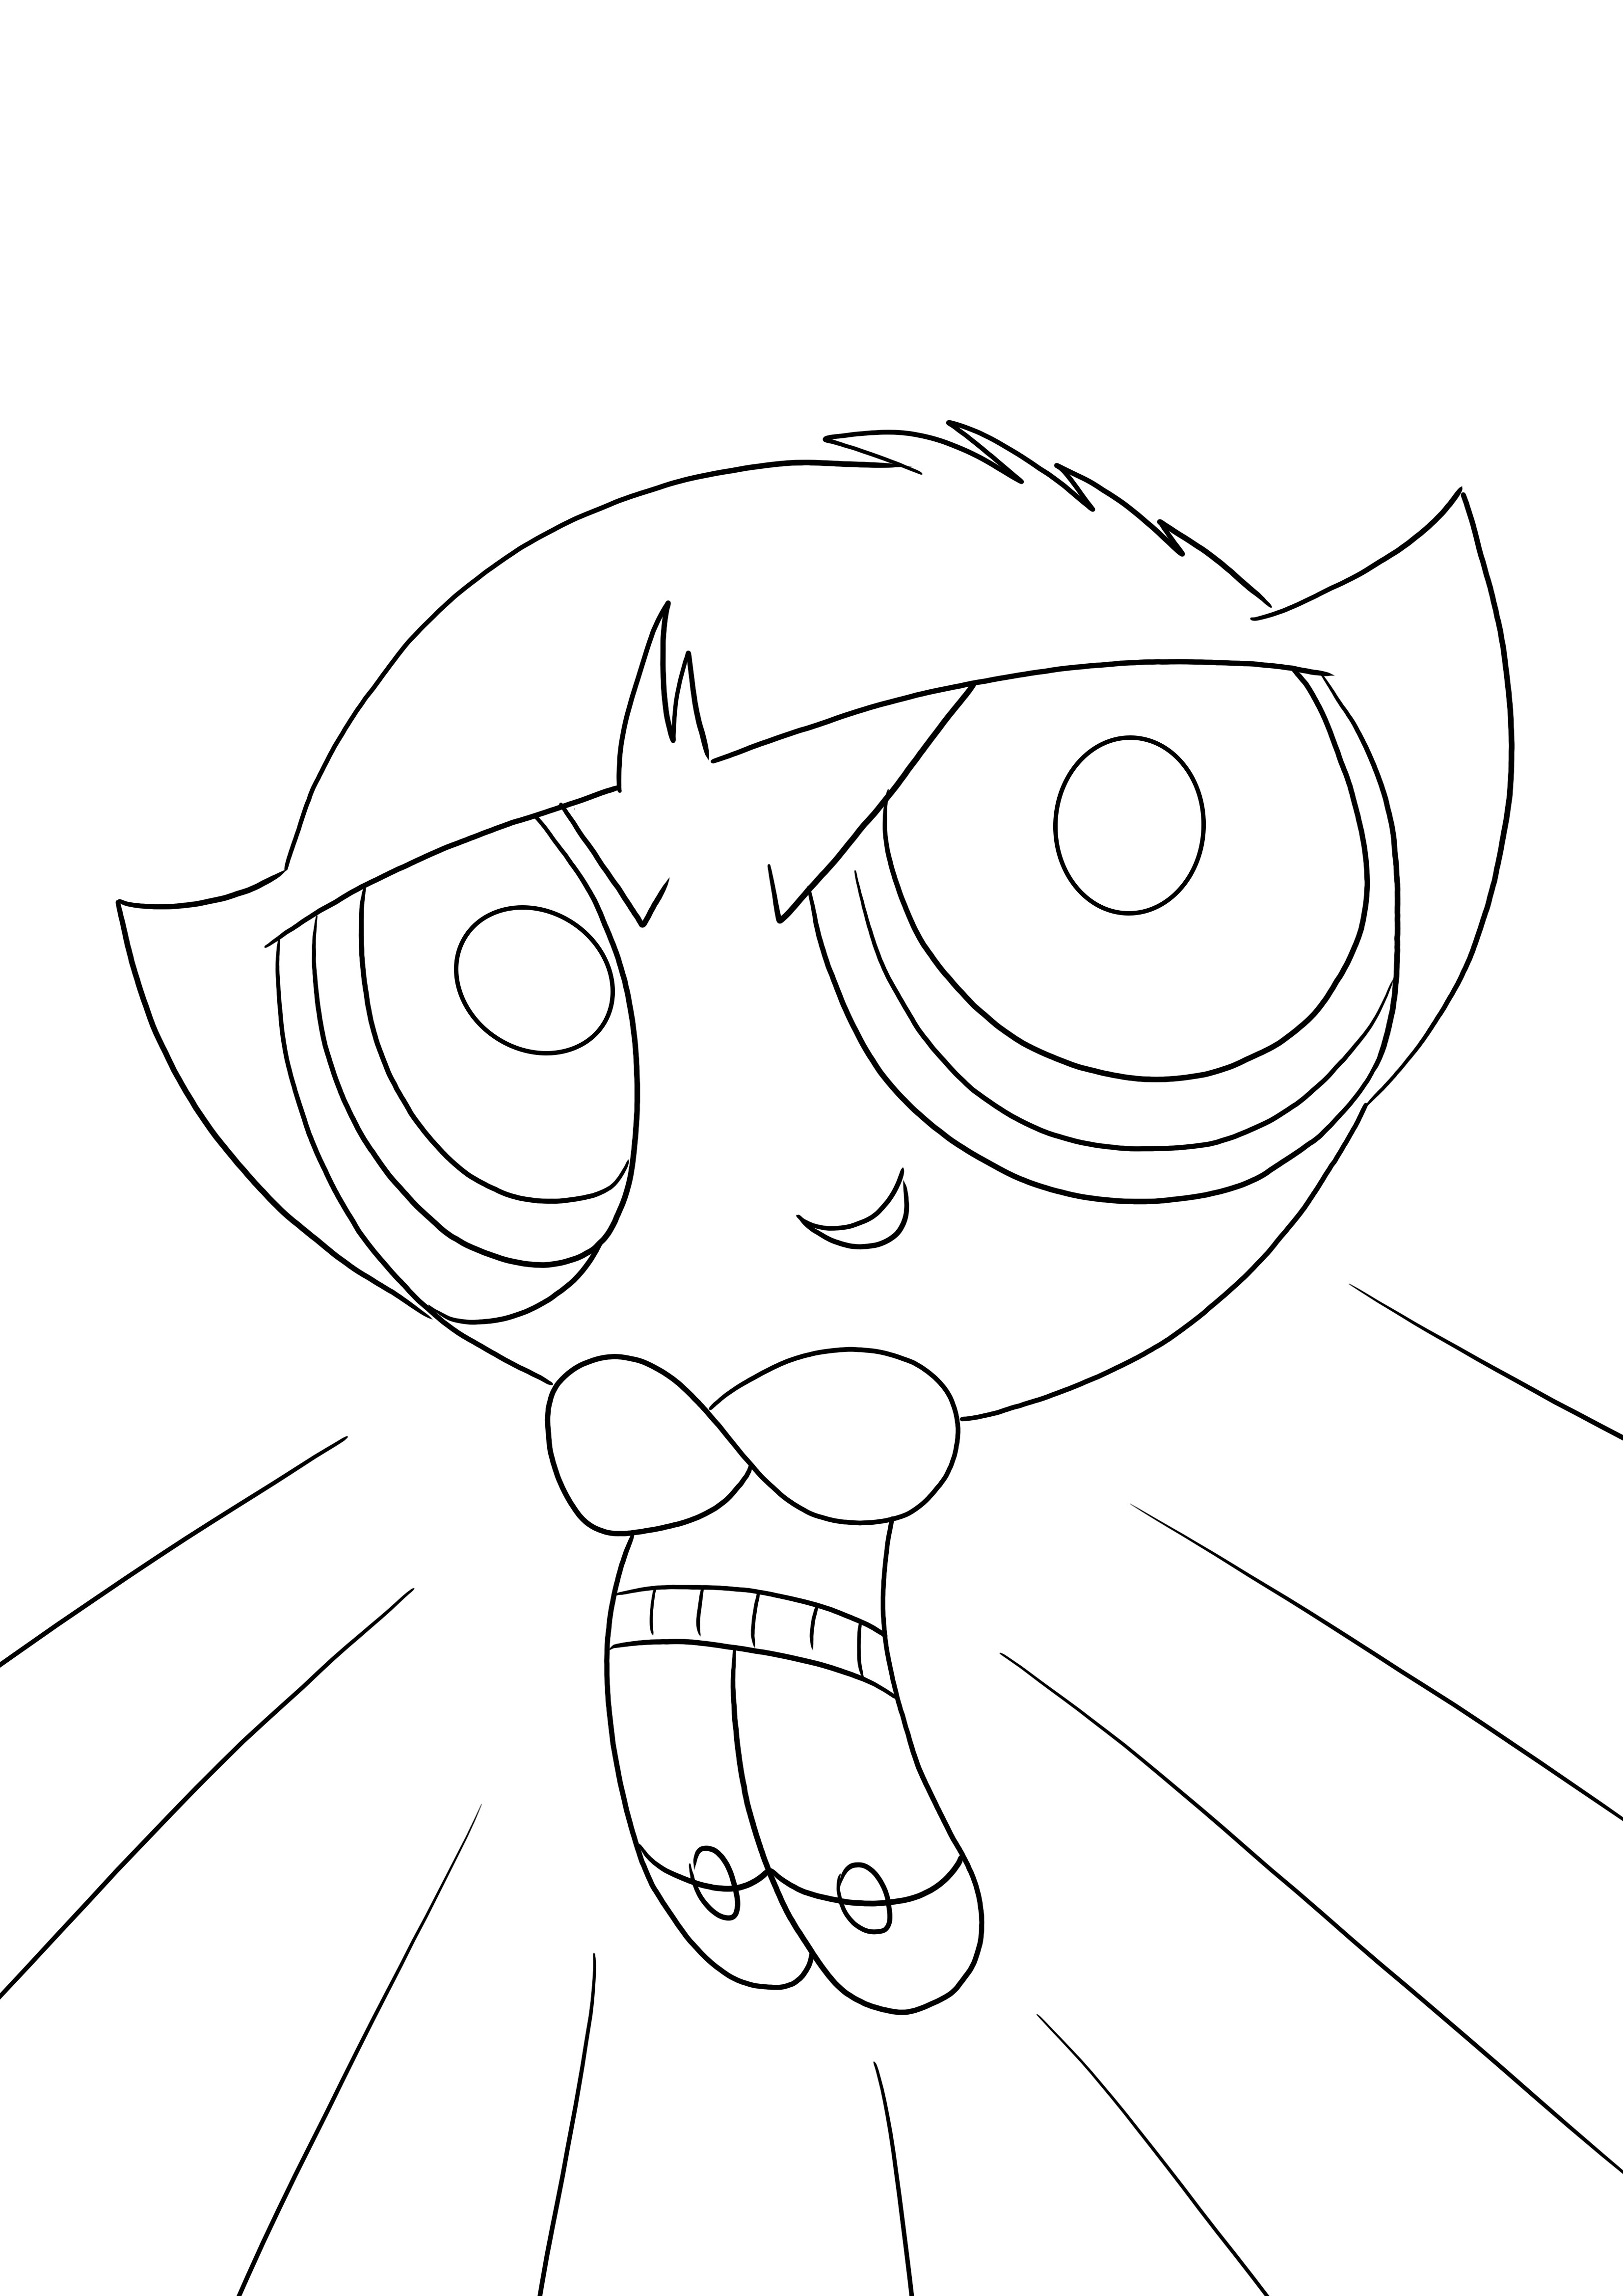 Buttercup from Powerpuff Girls to print or download and free to color